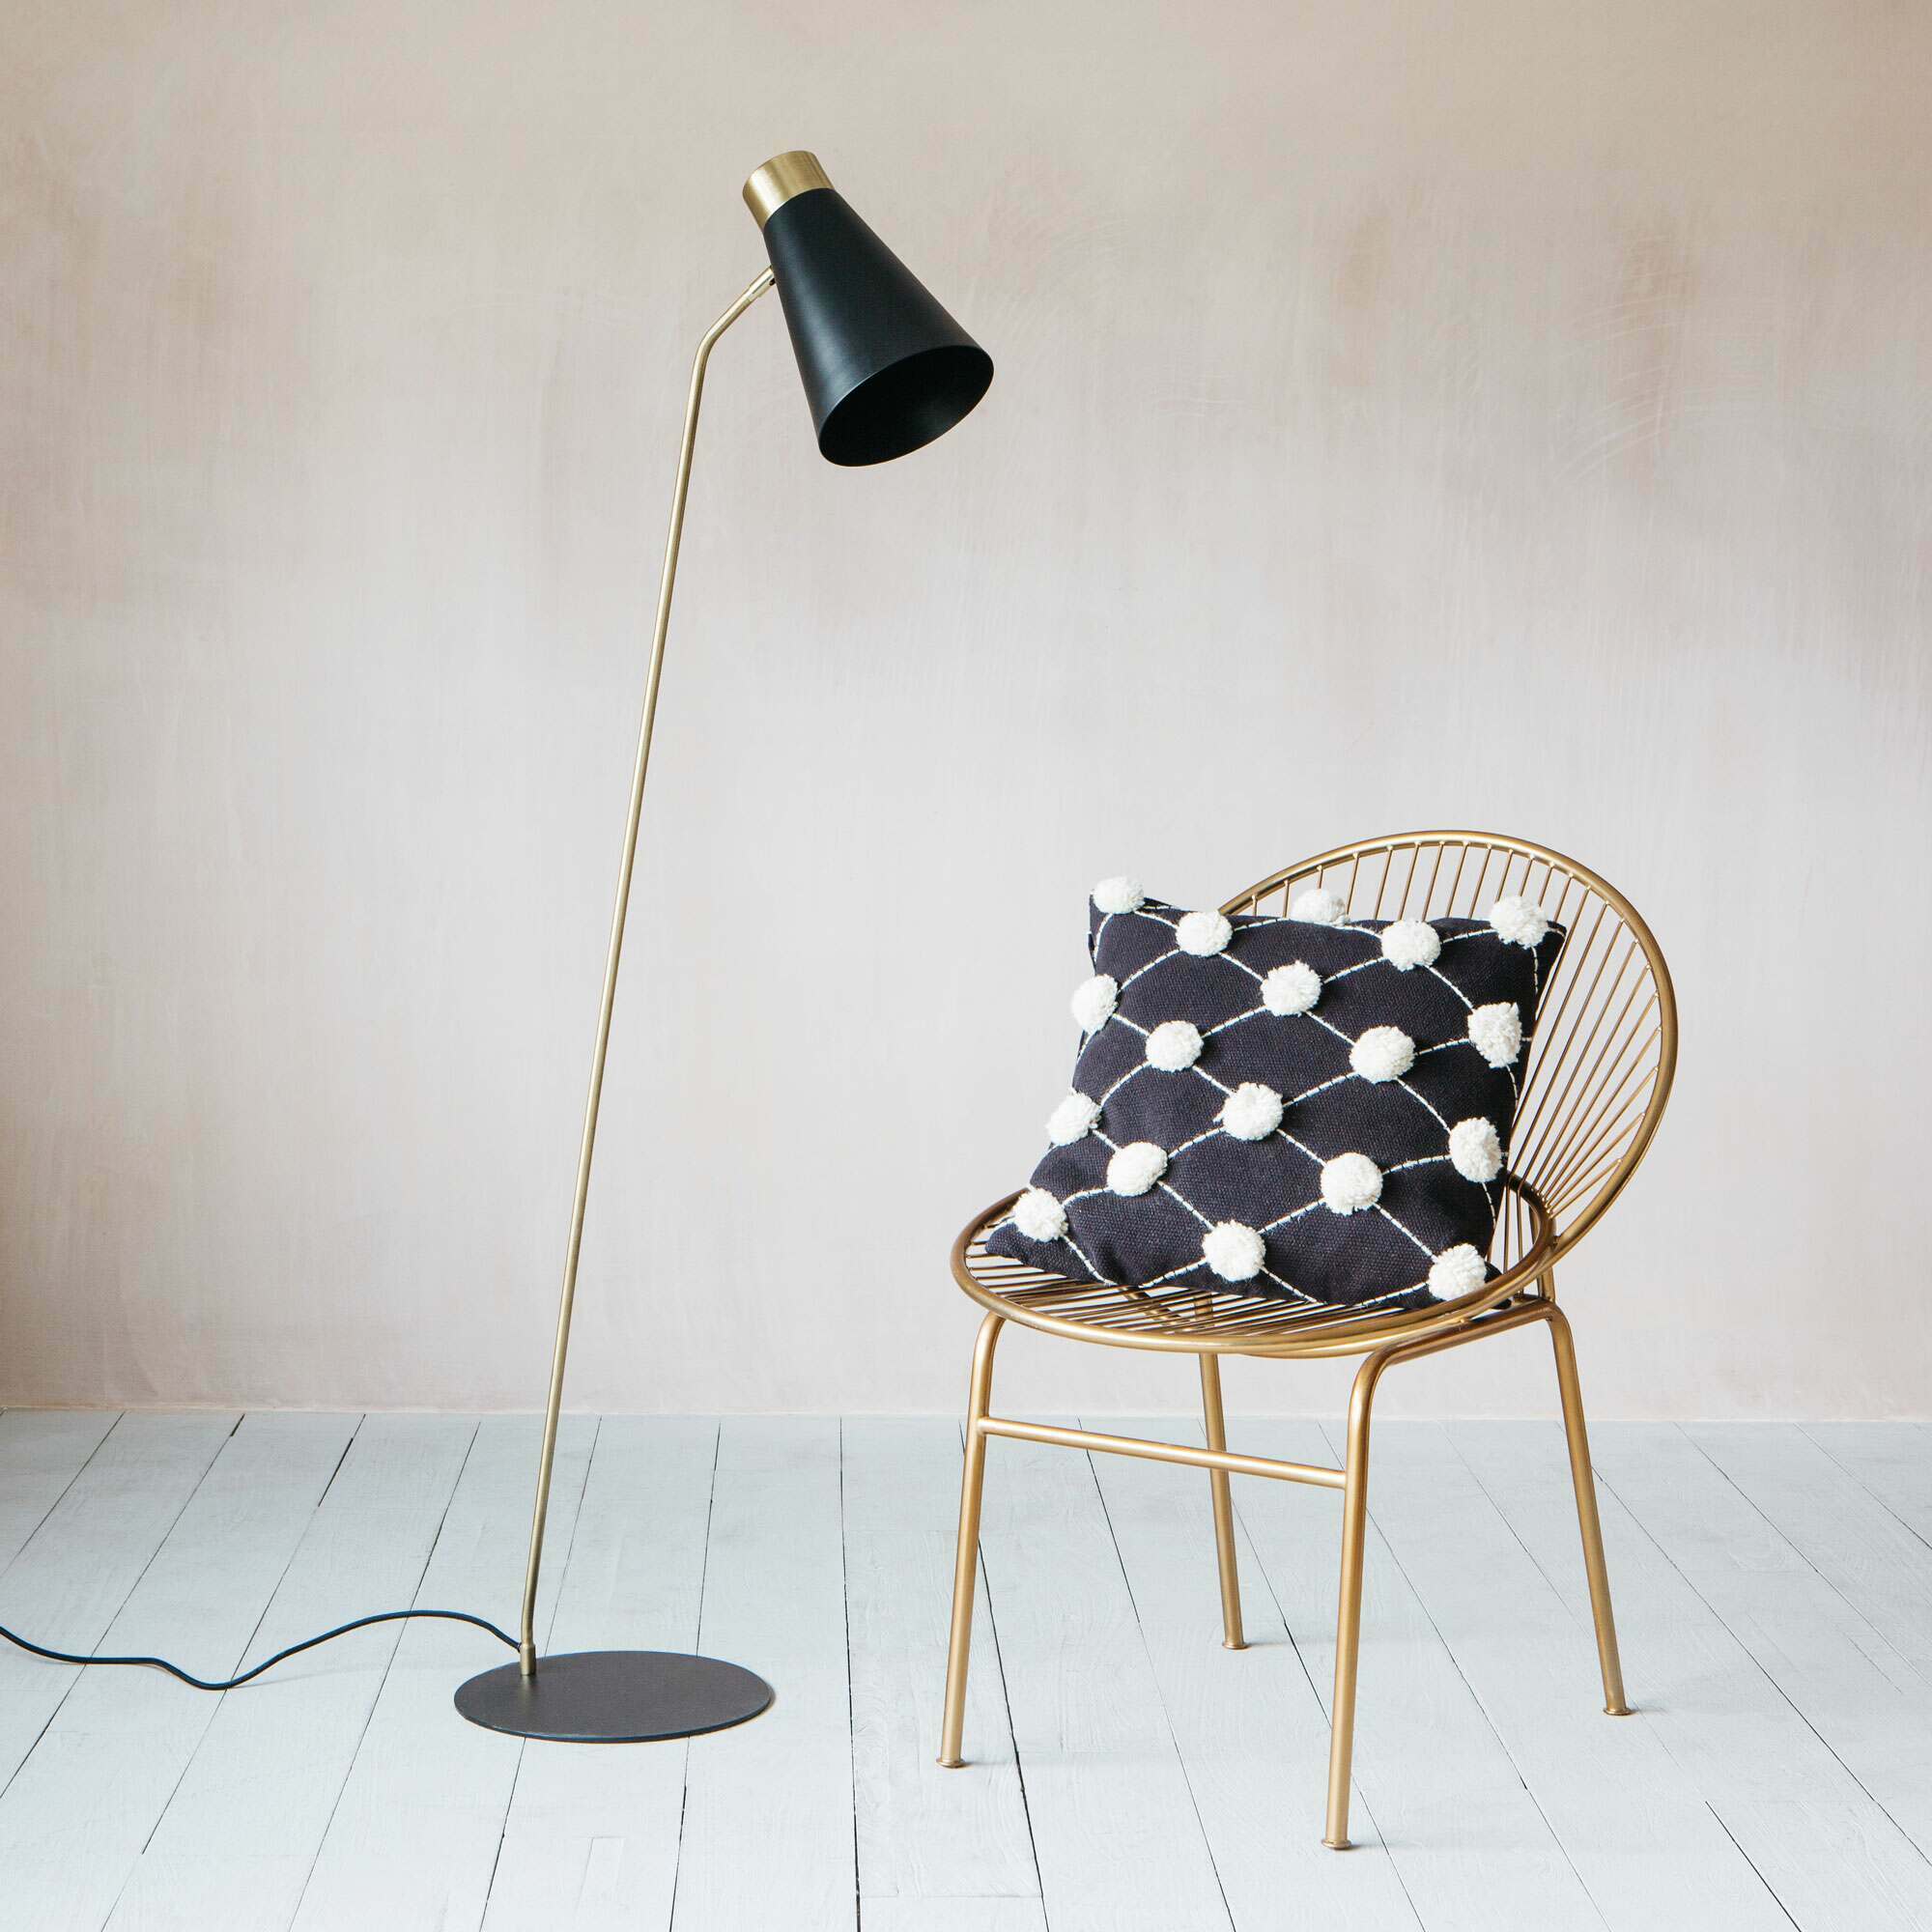 Read more about Graham and green chase black floor lamp